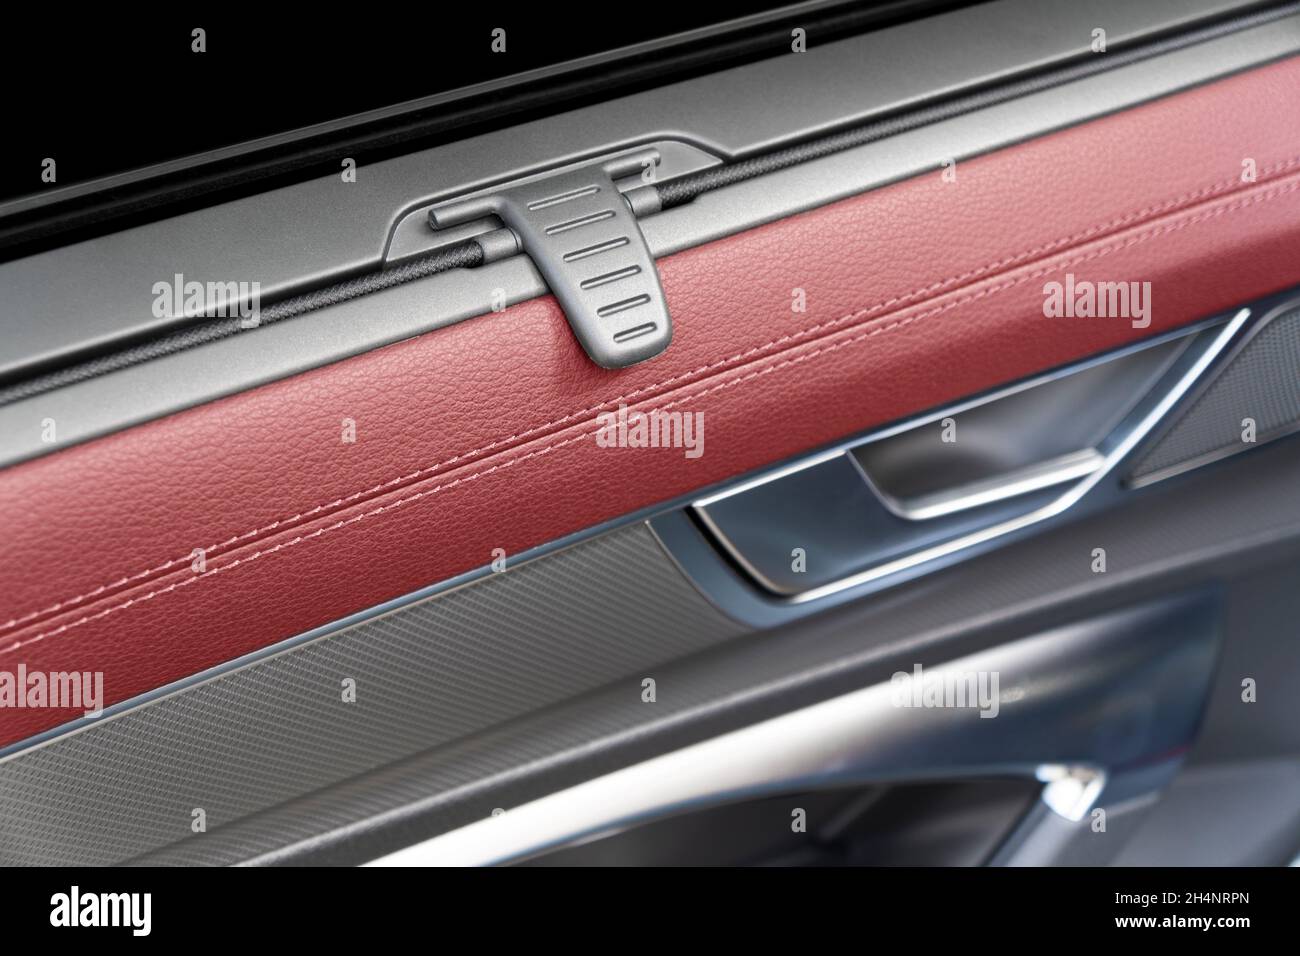 Car door handle with sun shade inside the luxury modern car with red leather texture with stitching. Switch button control. Modern car interior detail Stock Photo